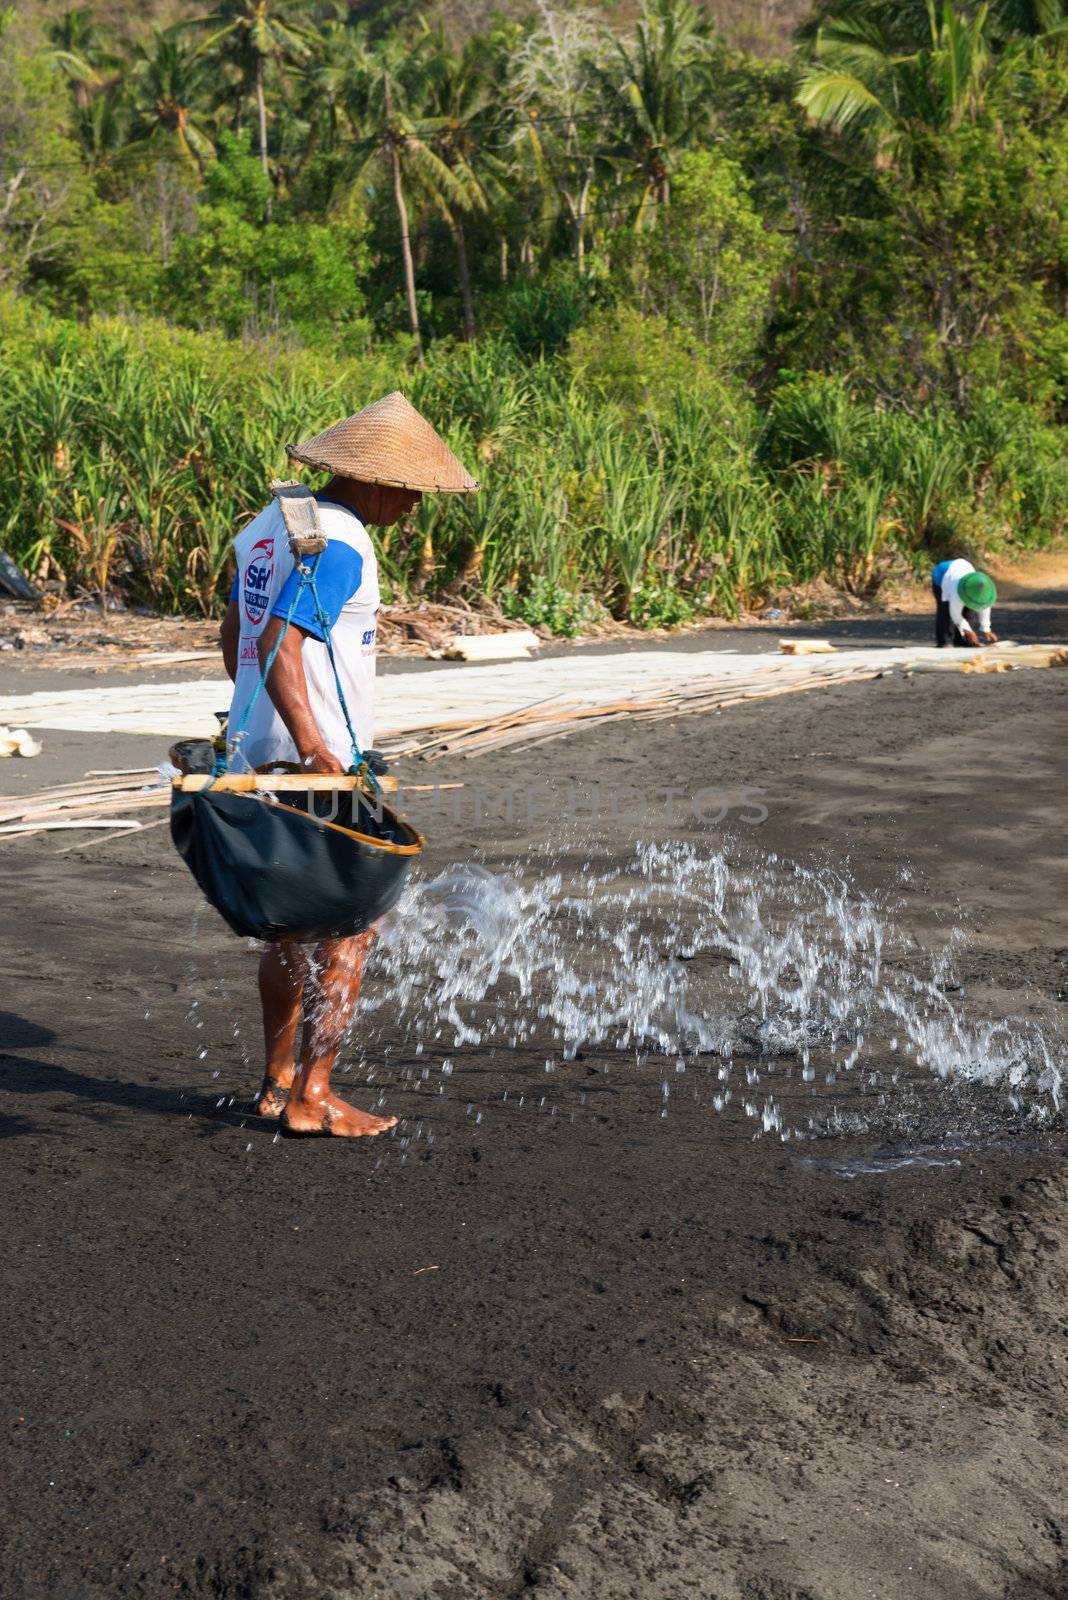 BALI, INDONESIA - SEP 26: Manual worker spreads sea water on black volcanic sand for salt production on Sep 26, 2012 in Amuk Bay, Bali, Indonesia. It is a unique tradition dating back over 900 years. 